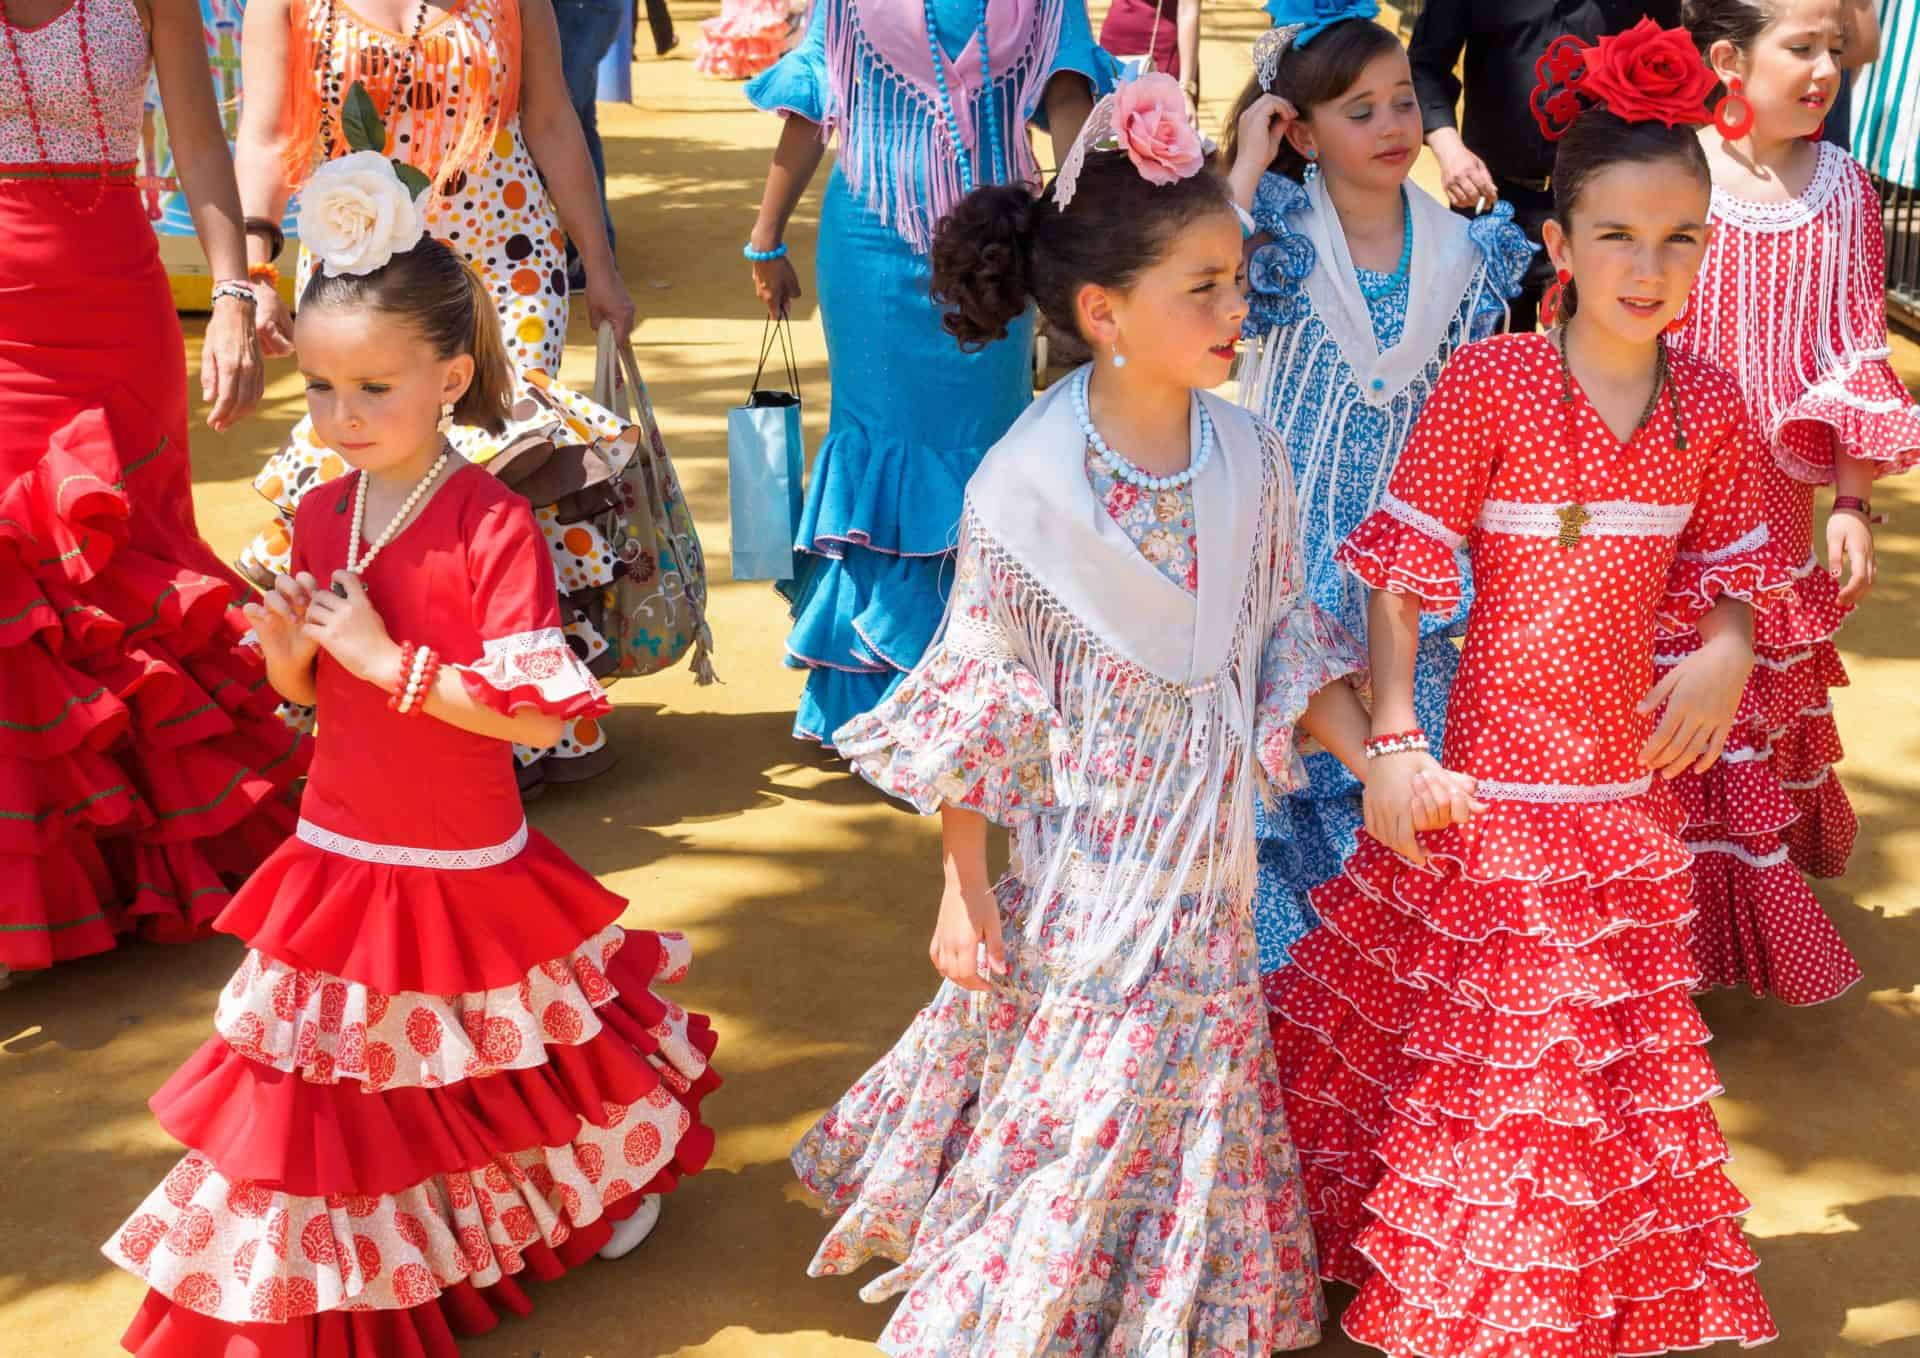 Spanish girls in traditional dress walking alongside Casitas at the Seville Fair called Feria de Abril